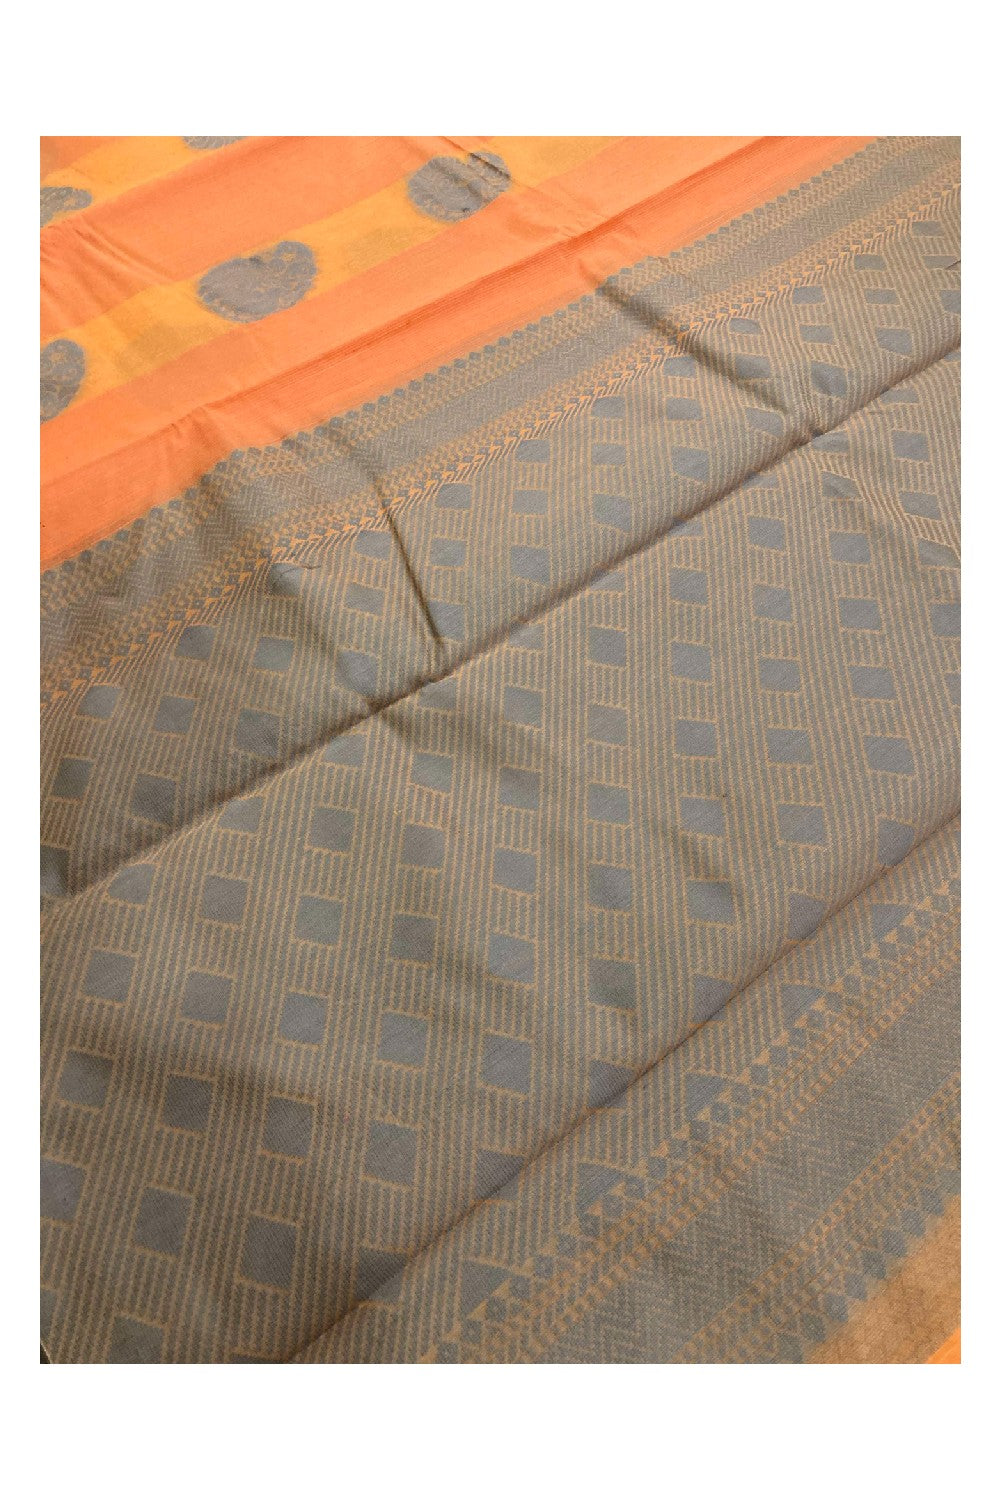 Southloom Sico Gadwal Semi Silk Saree in Orange with Paisley Motifs (Blouse Piece with Work)